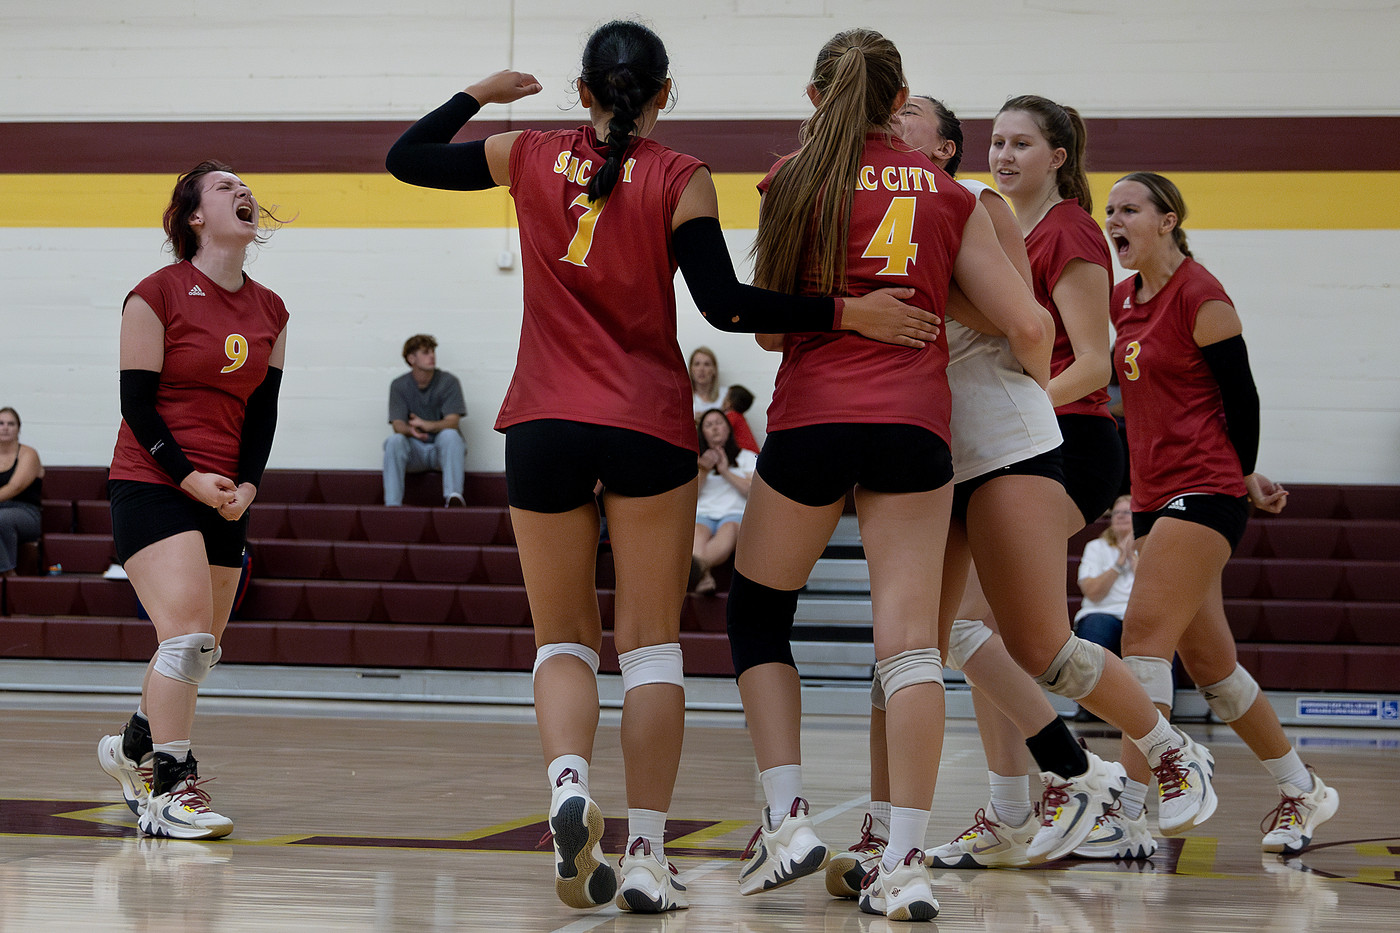 Sac City goes the distance and comes away with a 3-2 (25-23, 25-22, 23-25, 16-25, 15-13) win over the Falcons